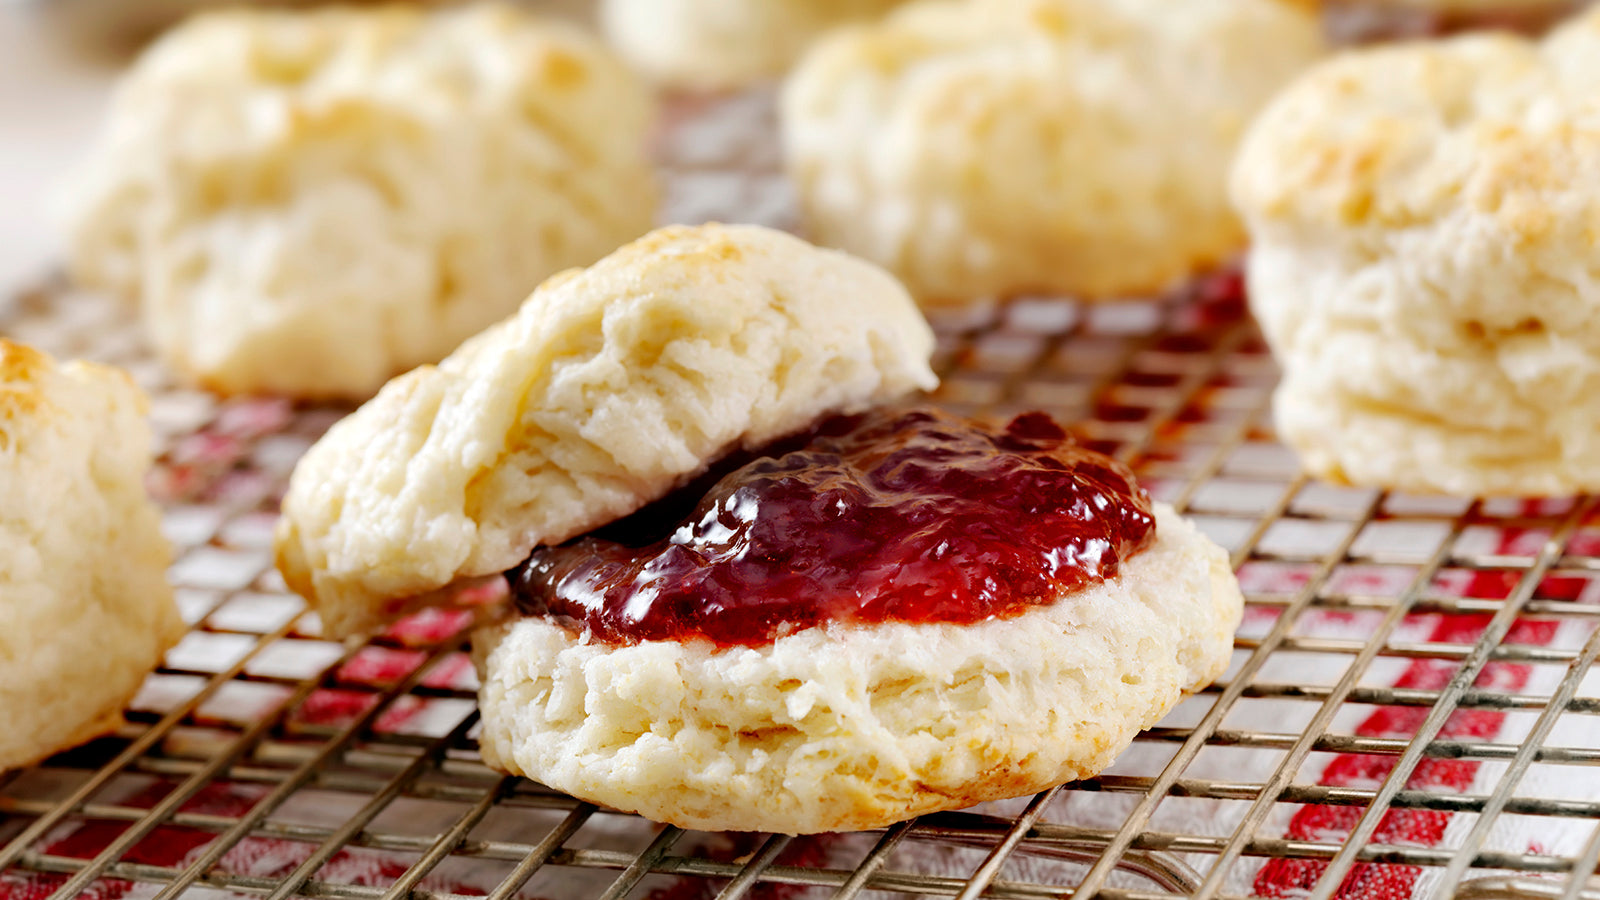 Biscuits & Homemade Jam - The Roadside